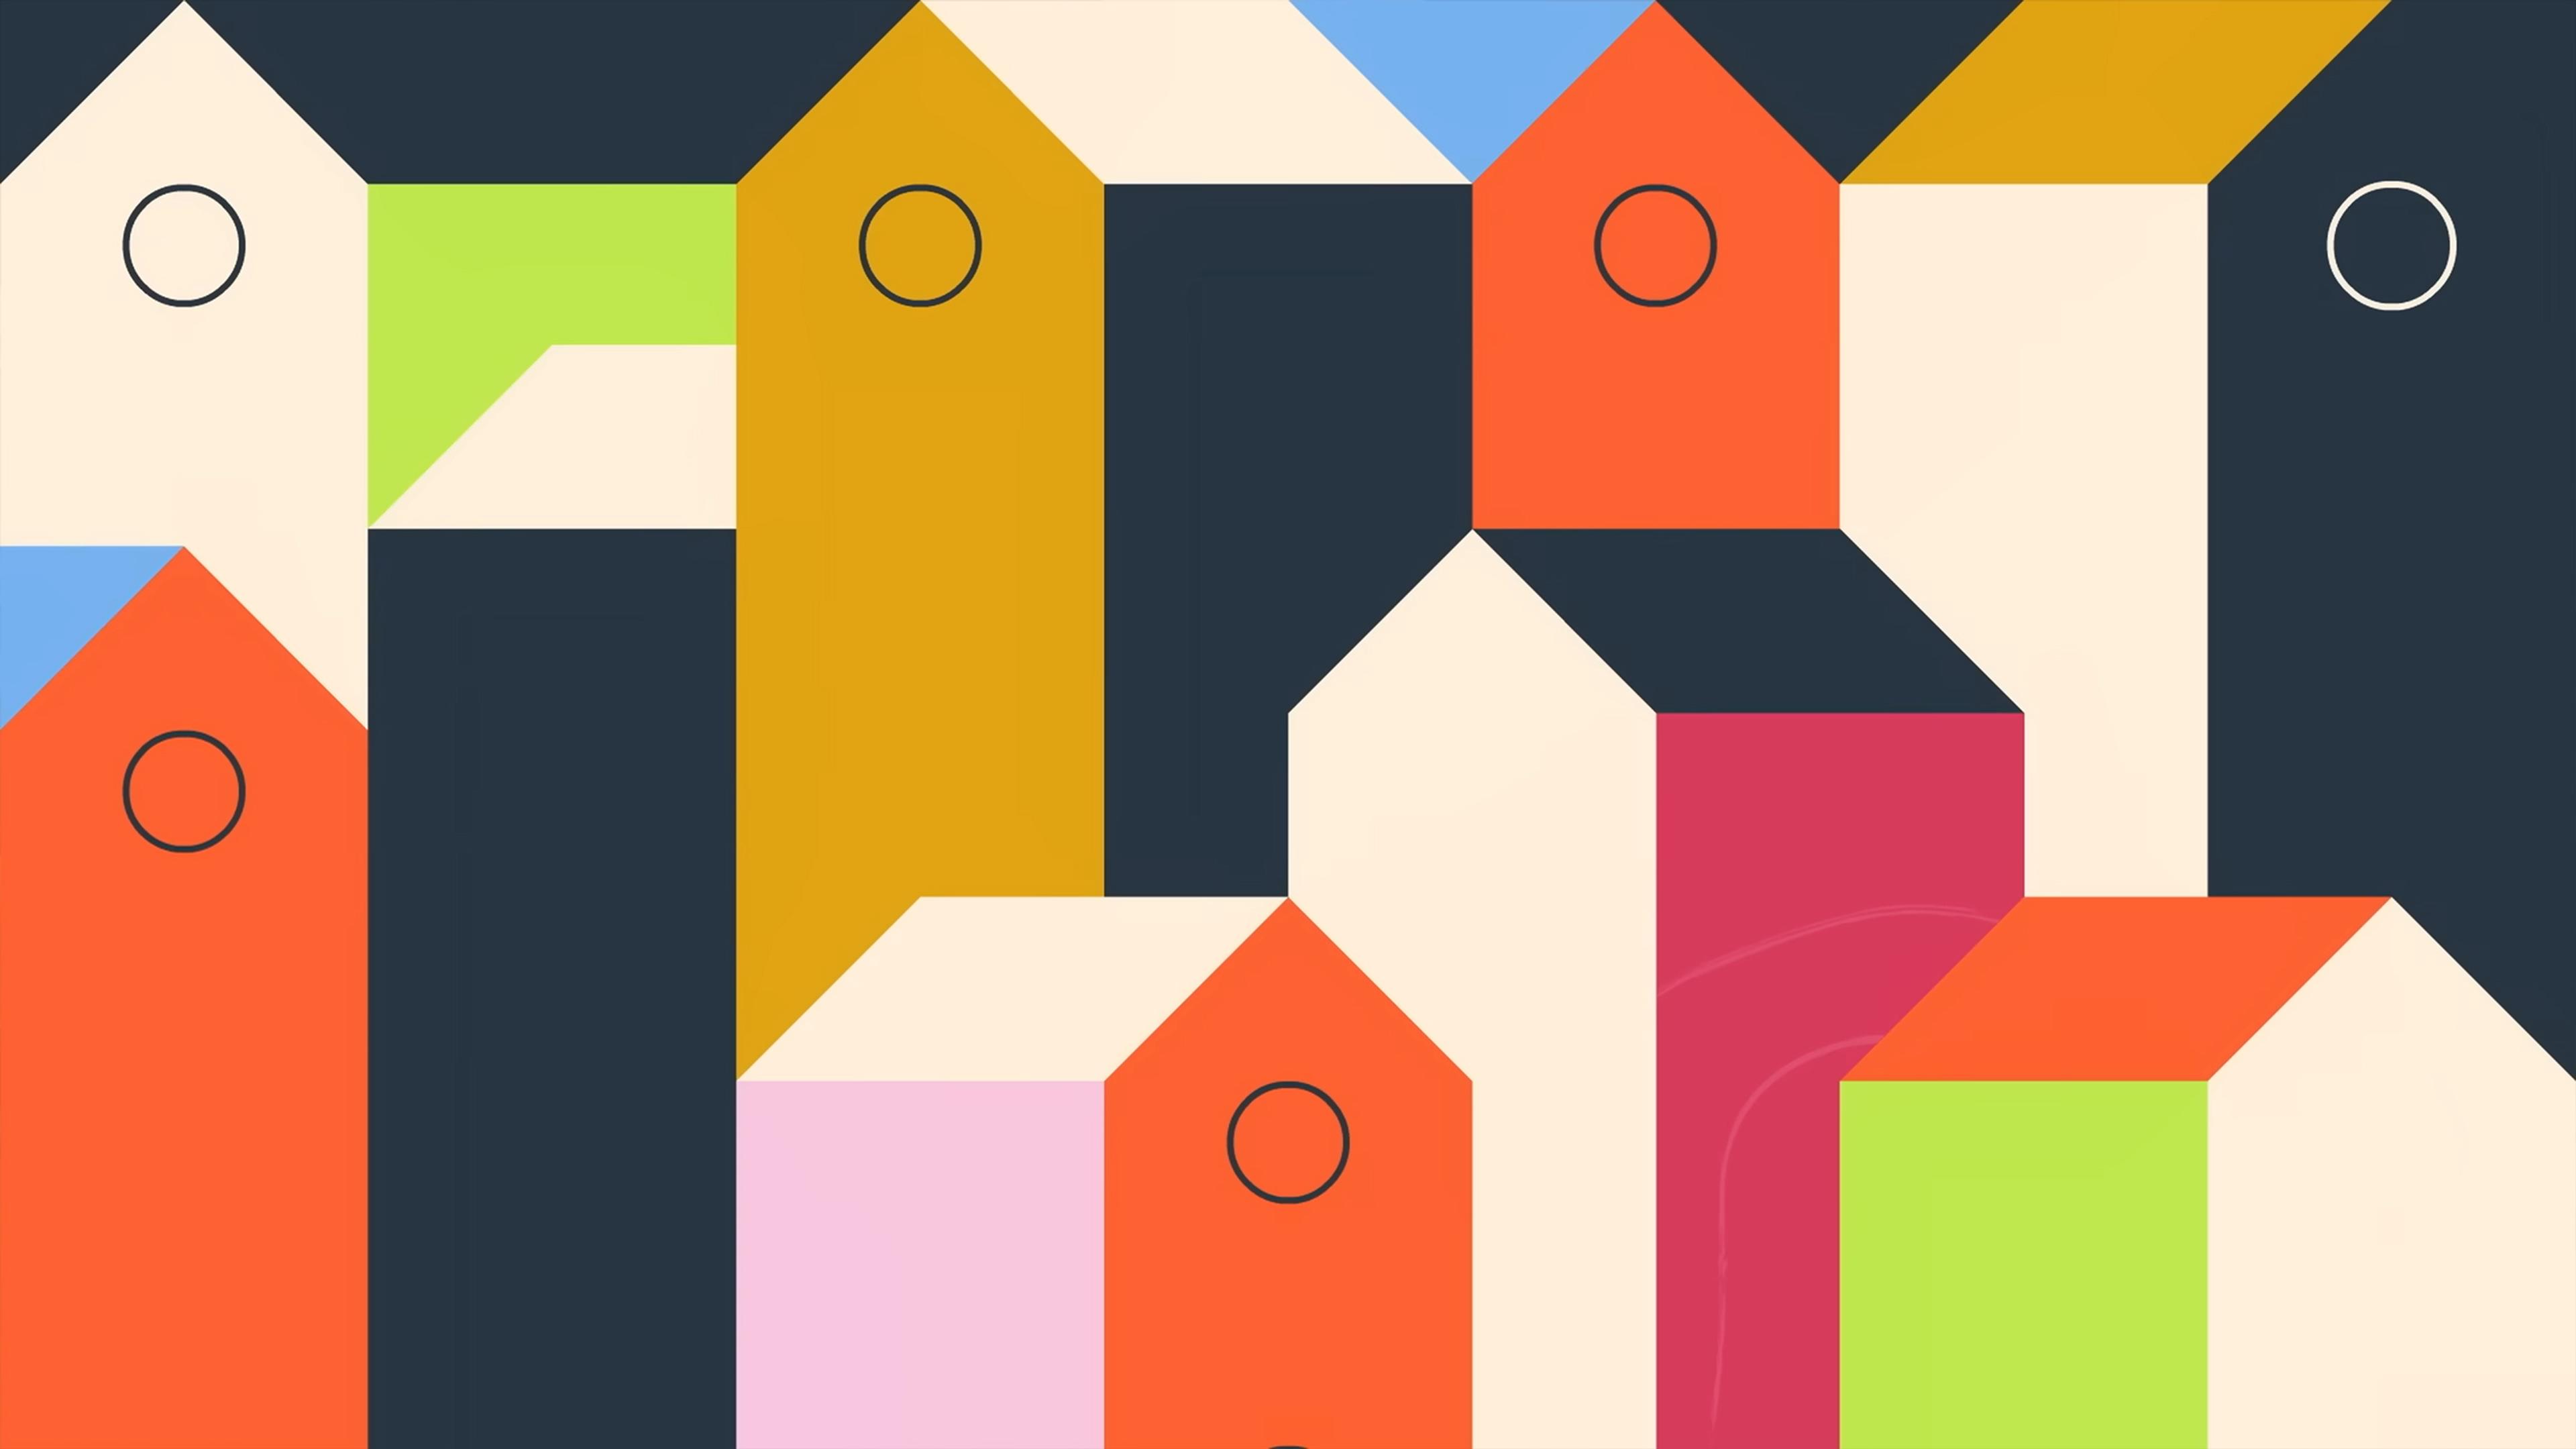 Abstract geometric pattern featuring overlapping rectangular and house-like shapes in various colours, including orange, yellow, green, pink, blue, red, and black, with circular details. The shapes create a visually intriguing mosaic-like composition.